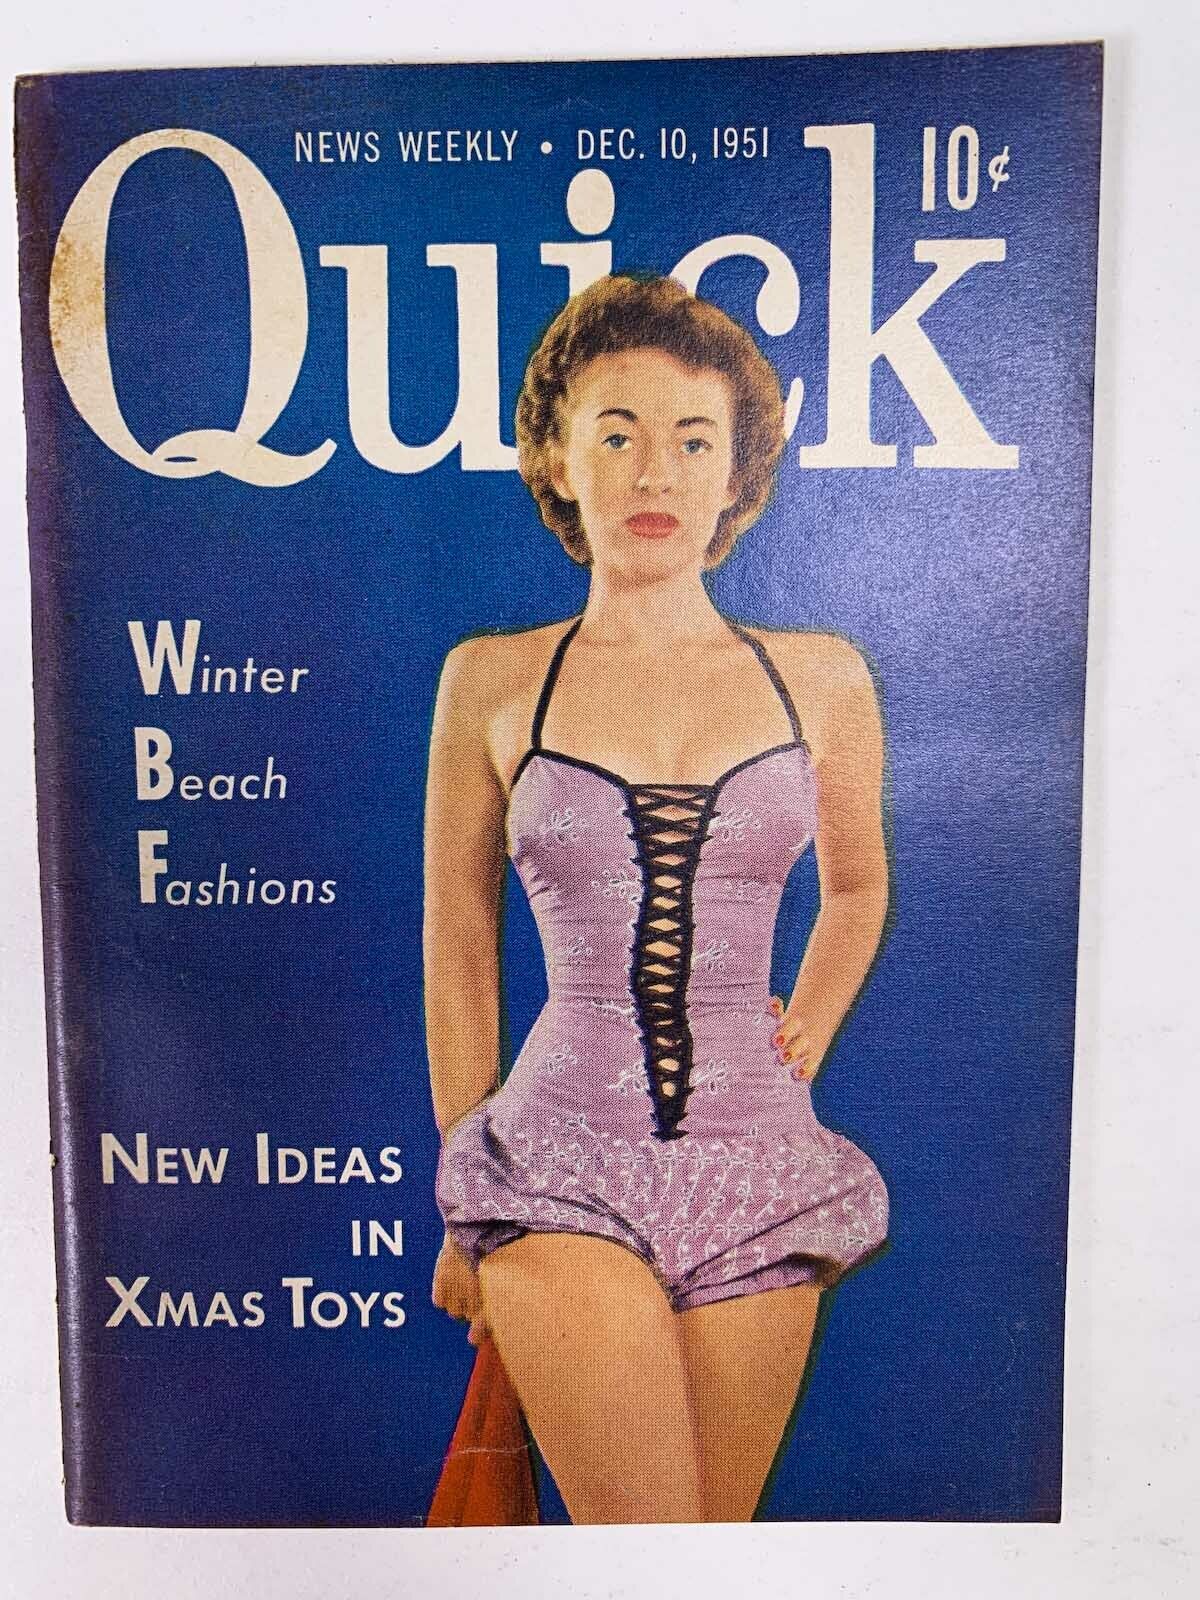 Quick News Weekly Magazine December 10 1951 cover Winter Beach Fashions